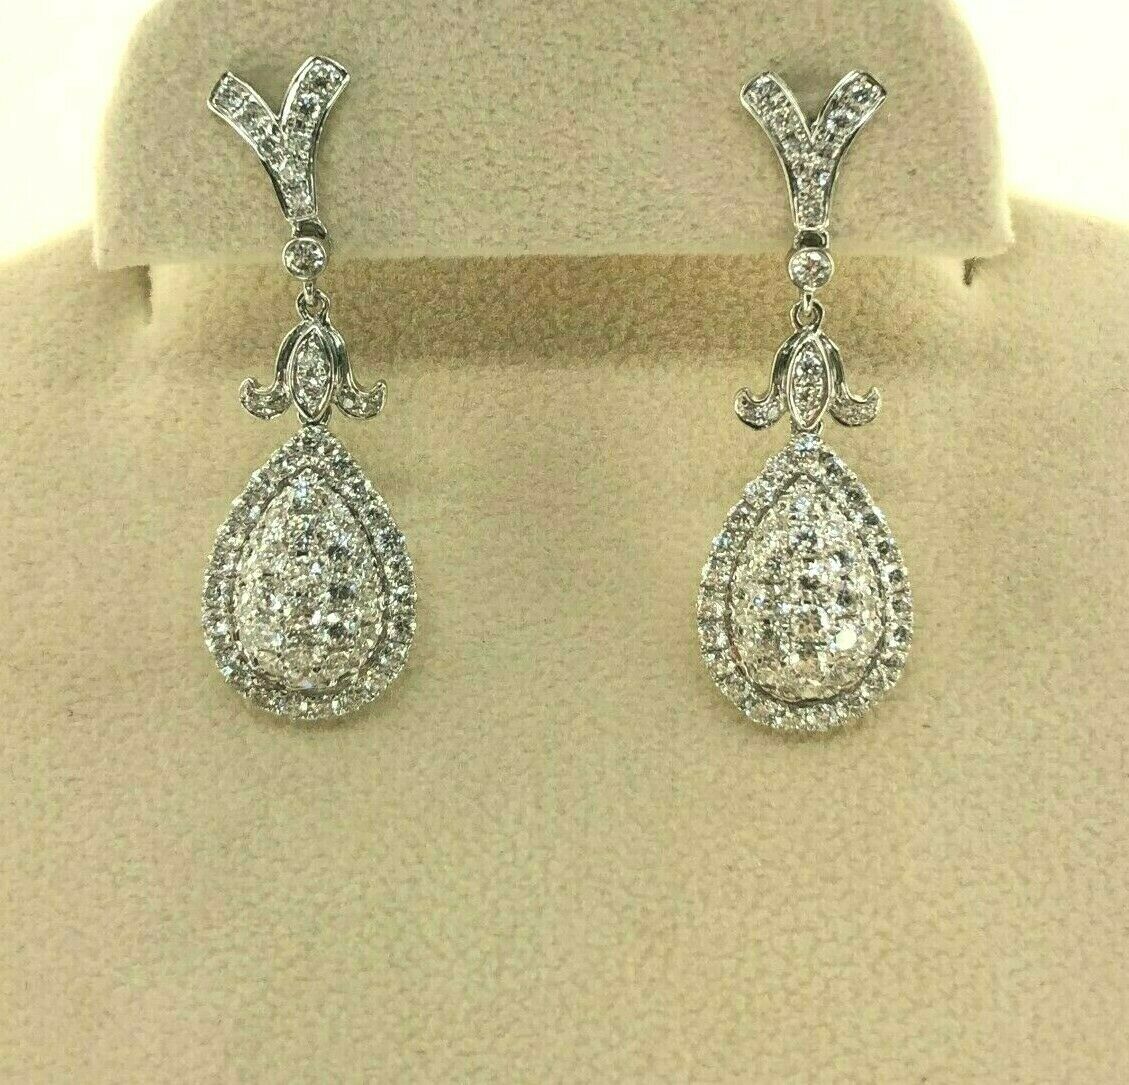 3.72 Carats Pave Set Round Diamond Halo Earrings 18K White Gold 1.30 Inch Drop